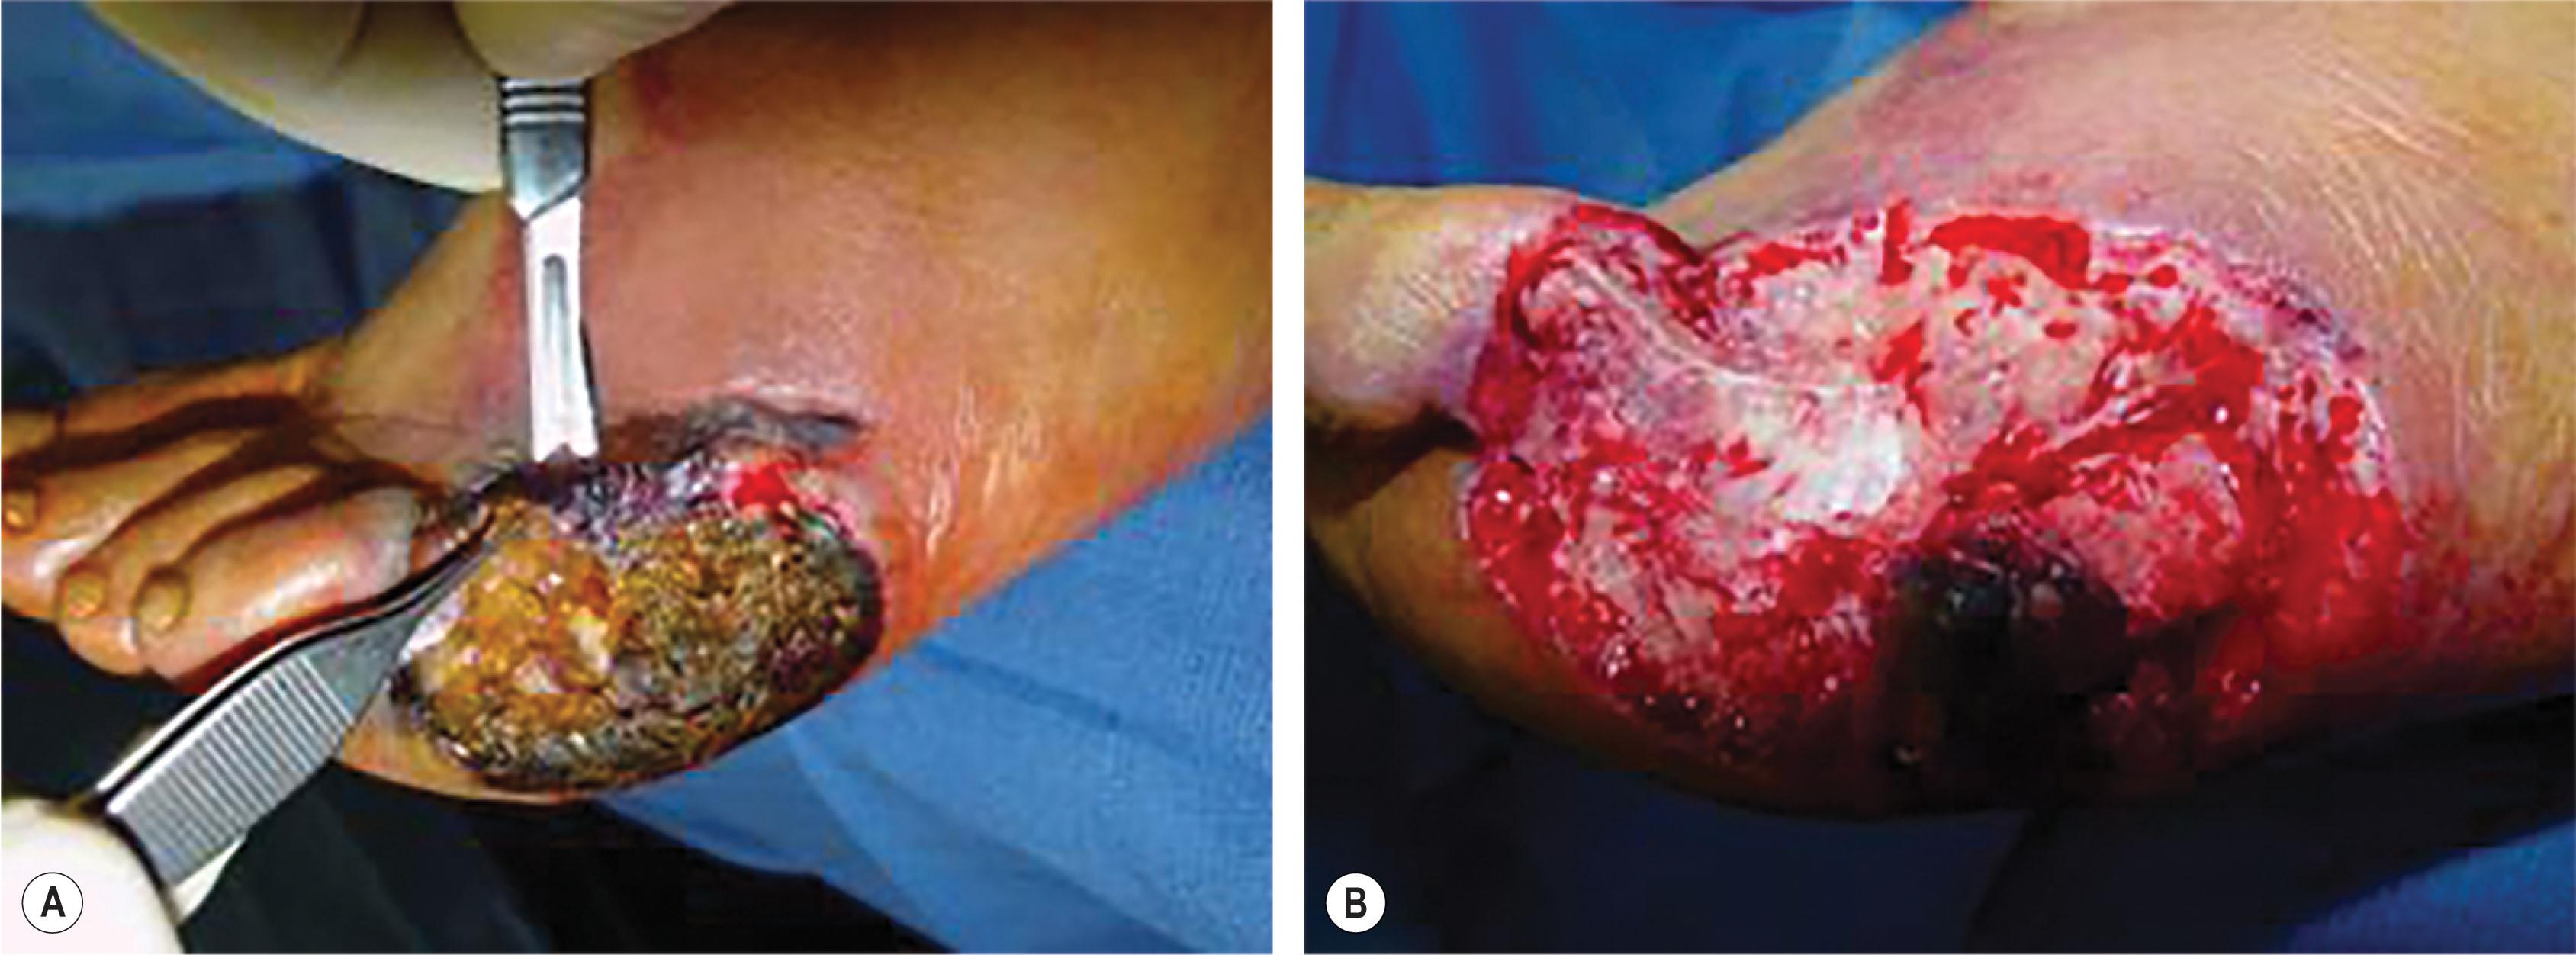 Figure 8.7, (A) Serial excision of a chronic and/or infected wound with a scalpel, rongeur, and saw to normal-color tissue (red, yellow, white) is critical to establishing a clean base. (B) The bone still needs to be resected, but the rest of the tissue has the desired color and texture. This is the technique to successfully convert a chronic wound into an acute wound.